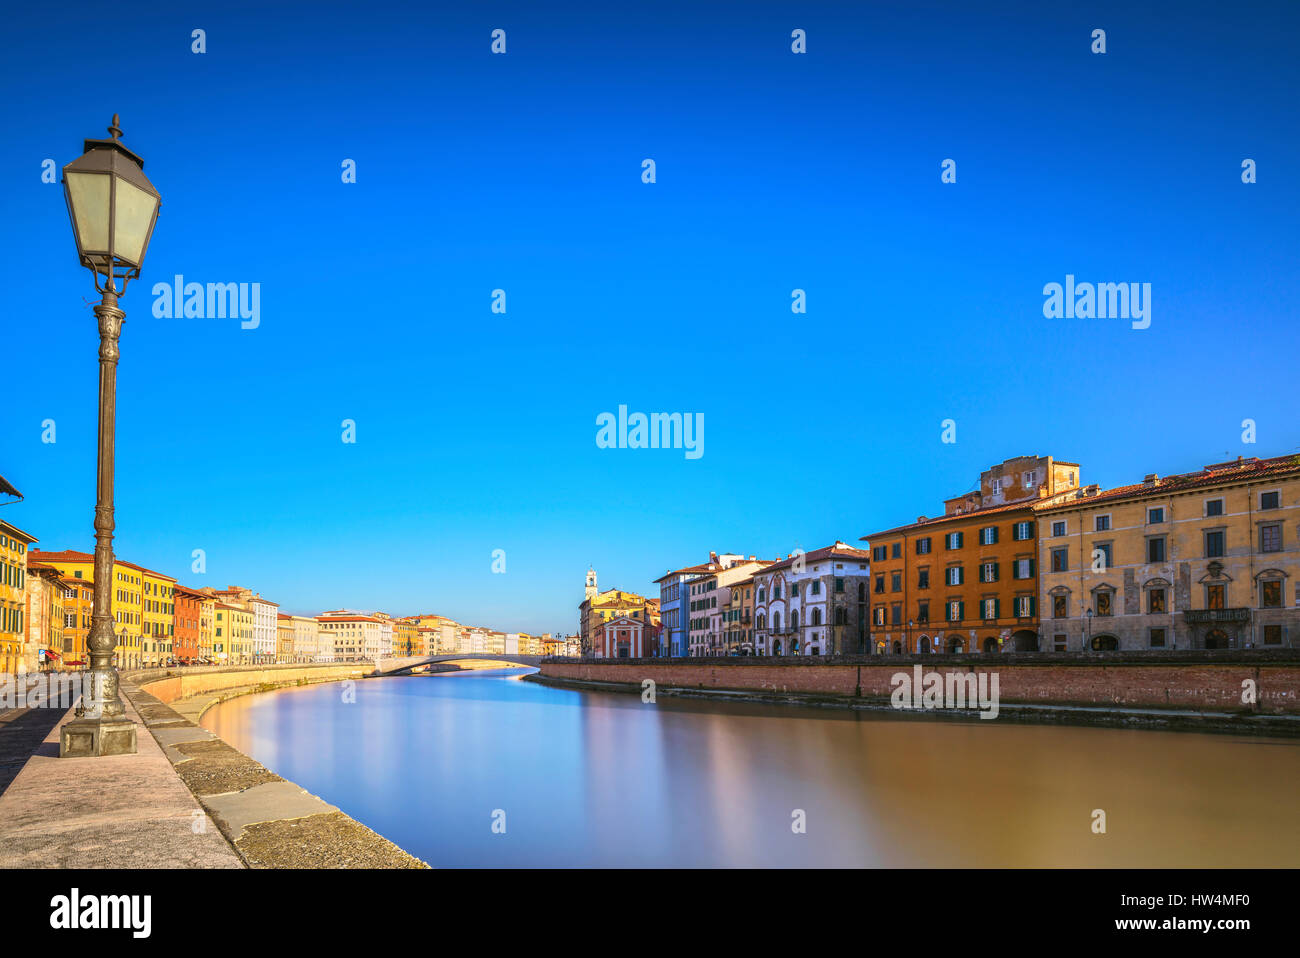 Pisa, Arno river, lamp and building facades reflection. Lungarno view. Long Exposure. Tuscany, Italy, Europe. Stock Photo